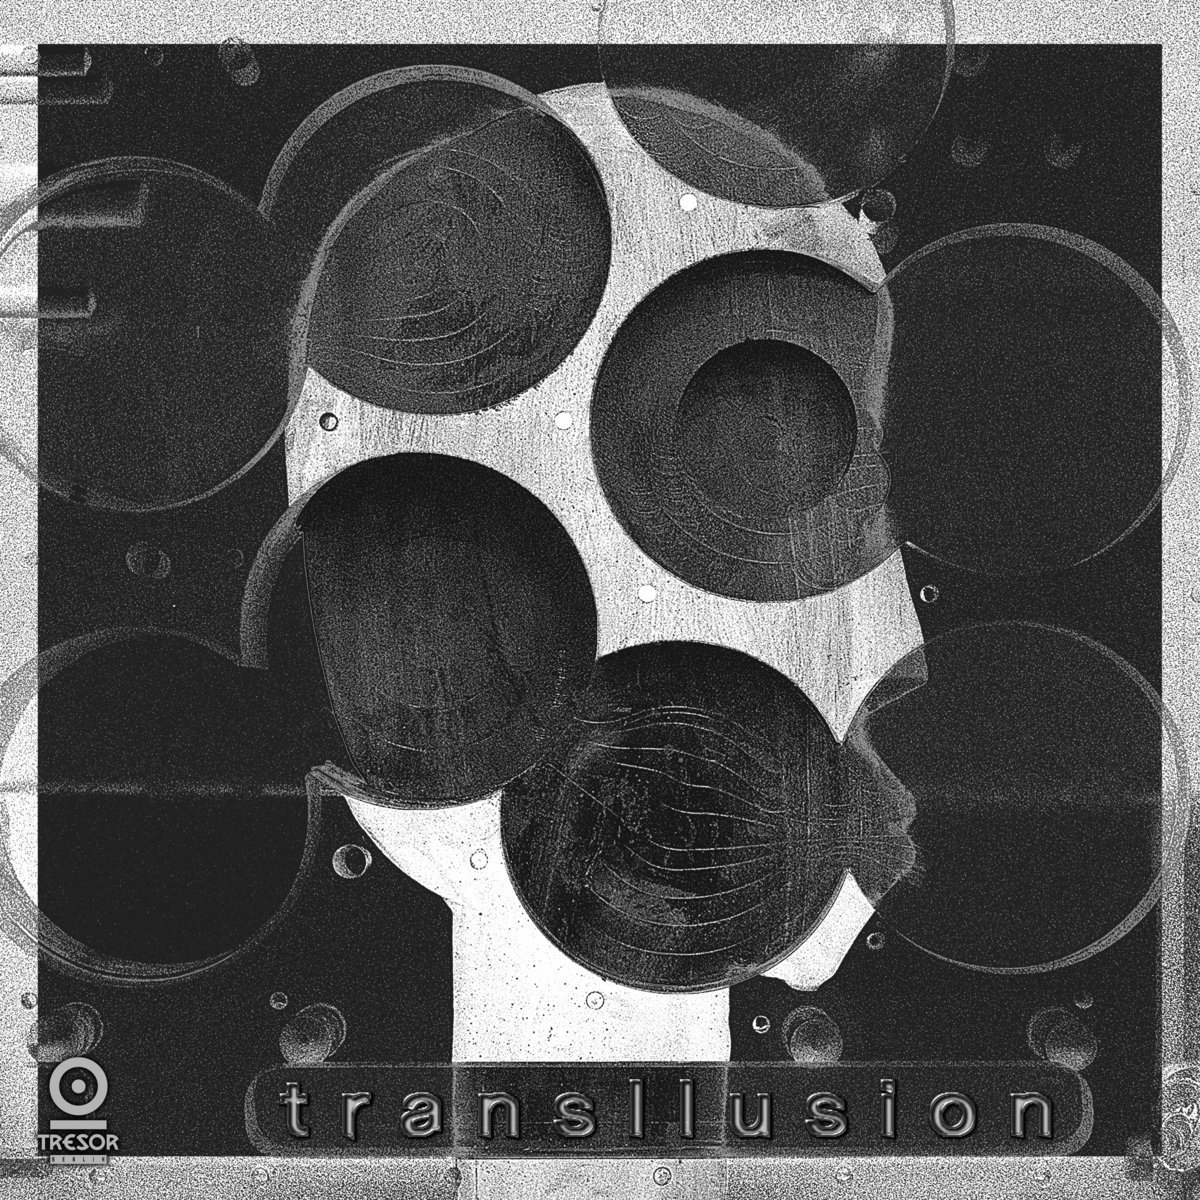 Transllusion - The Opening Of The Cerebral Gate vinyl cover